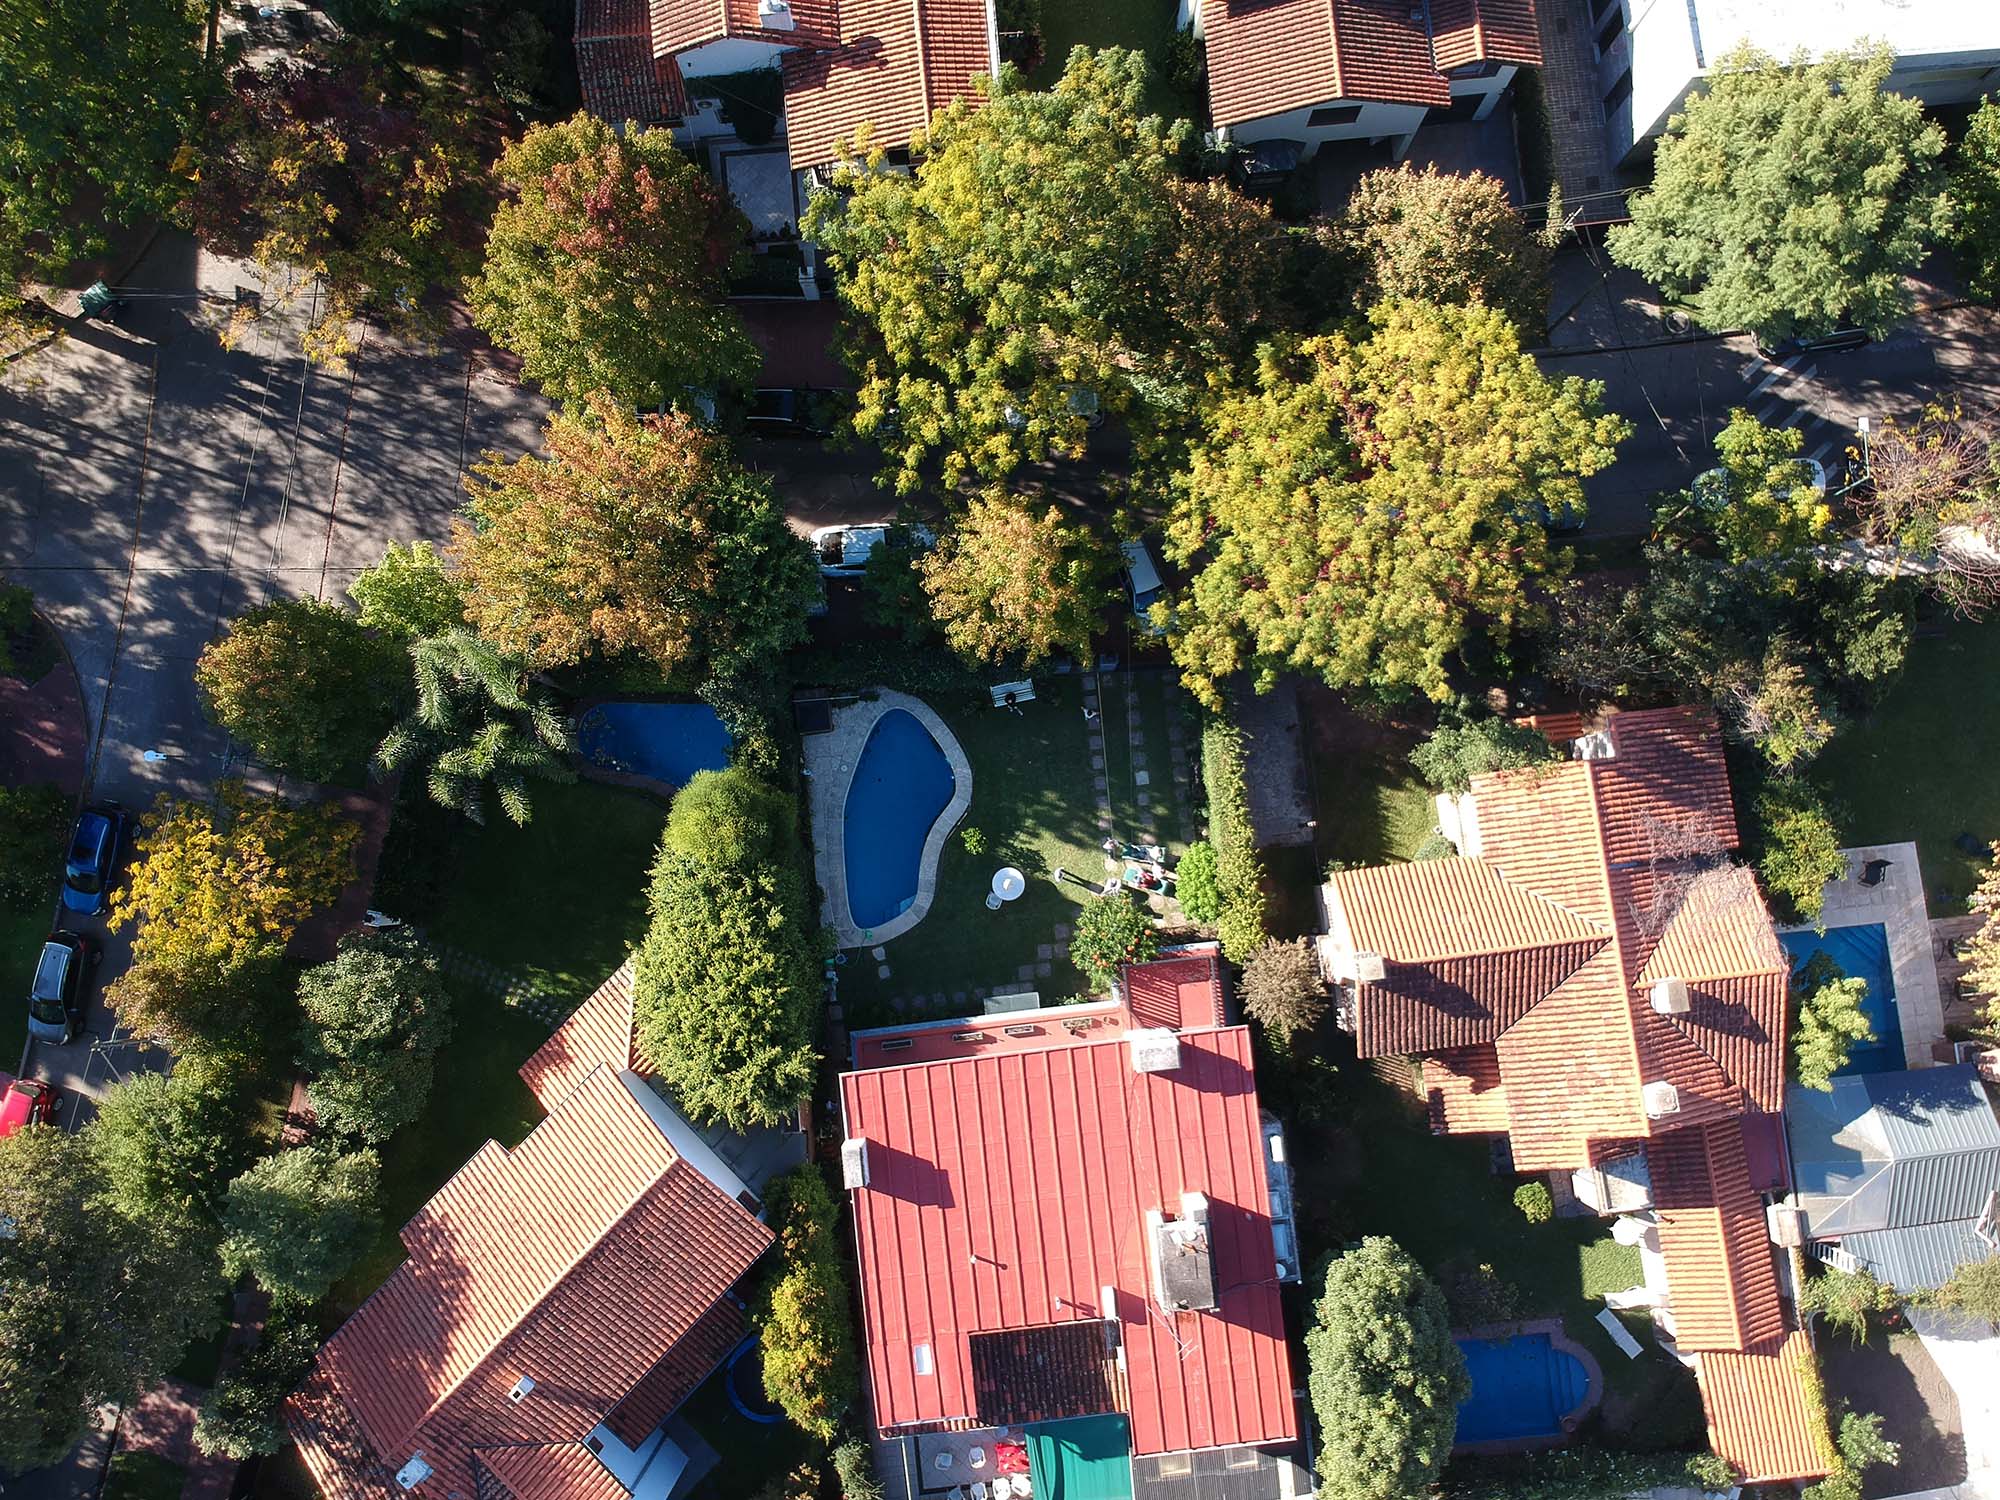 Top-down view of red-roofted houses, trees and a swimming pool